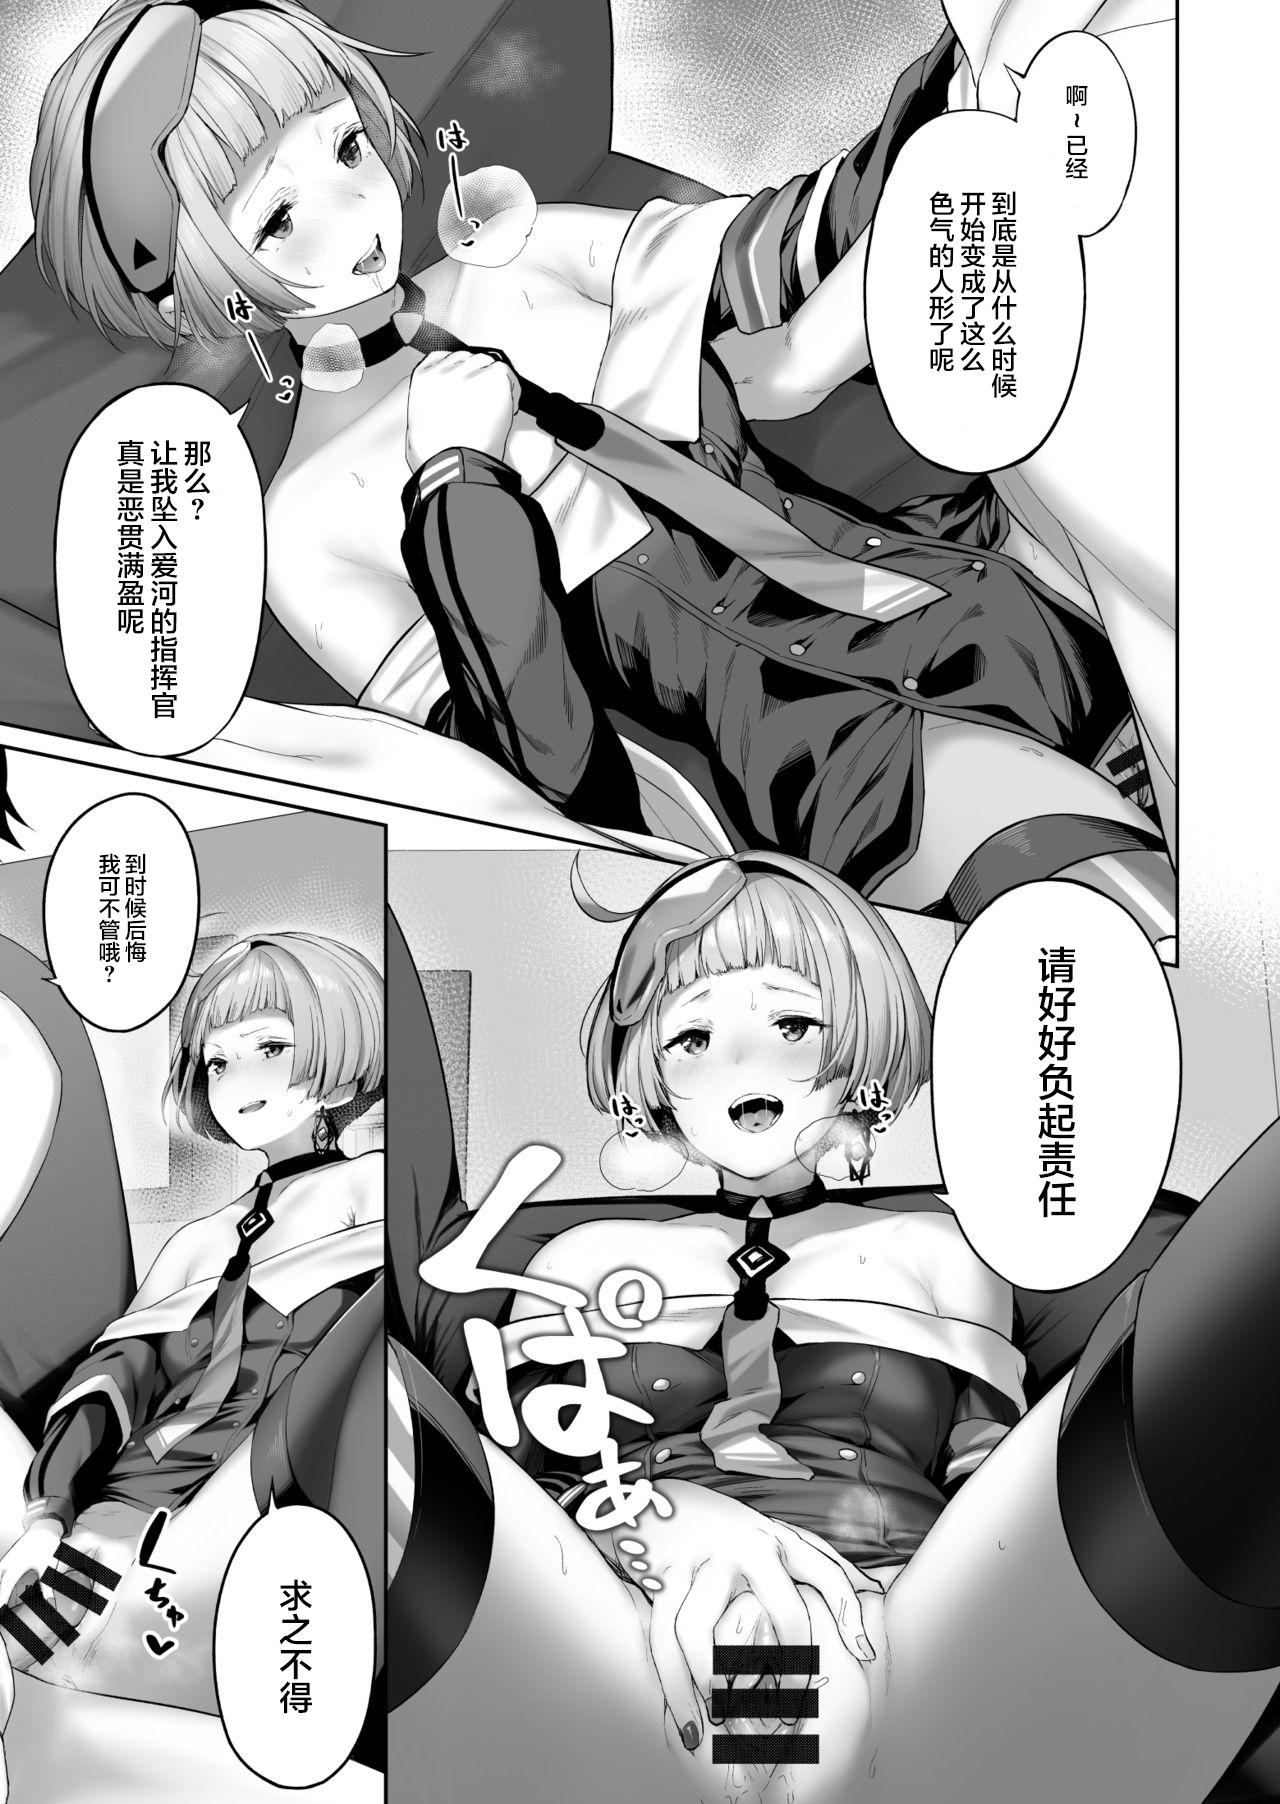 Bj Zas M21 - Girls frontline Bisexual - Page 9